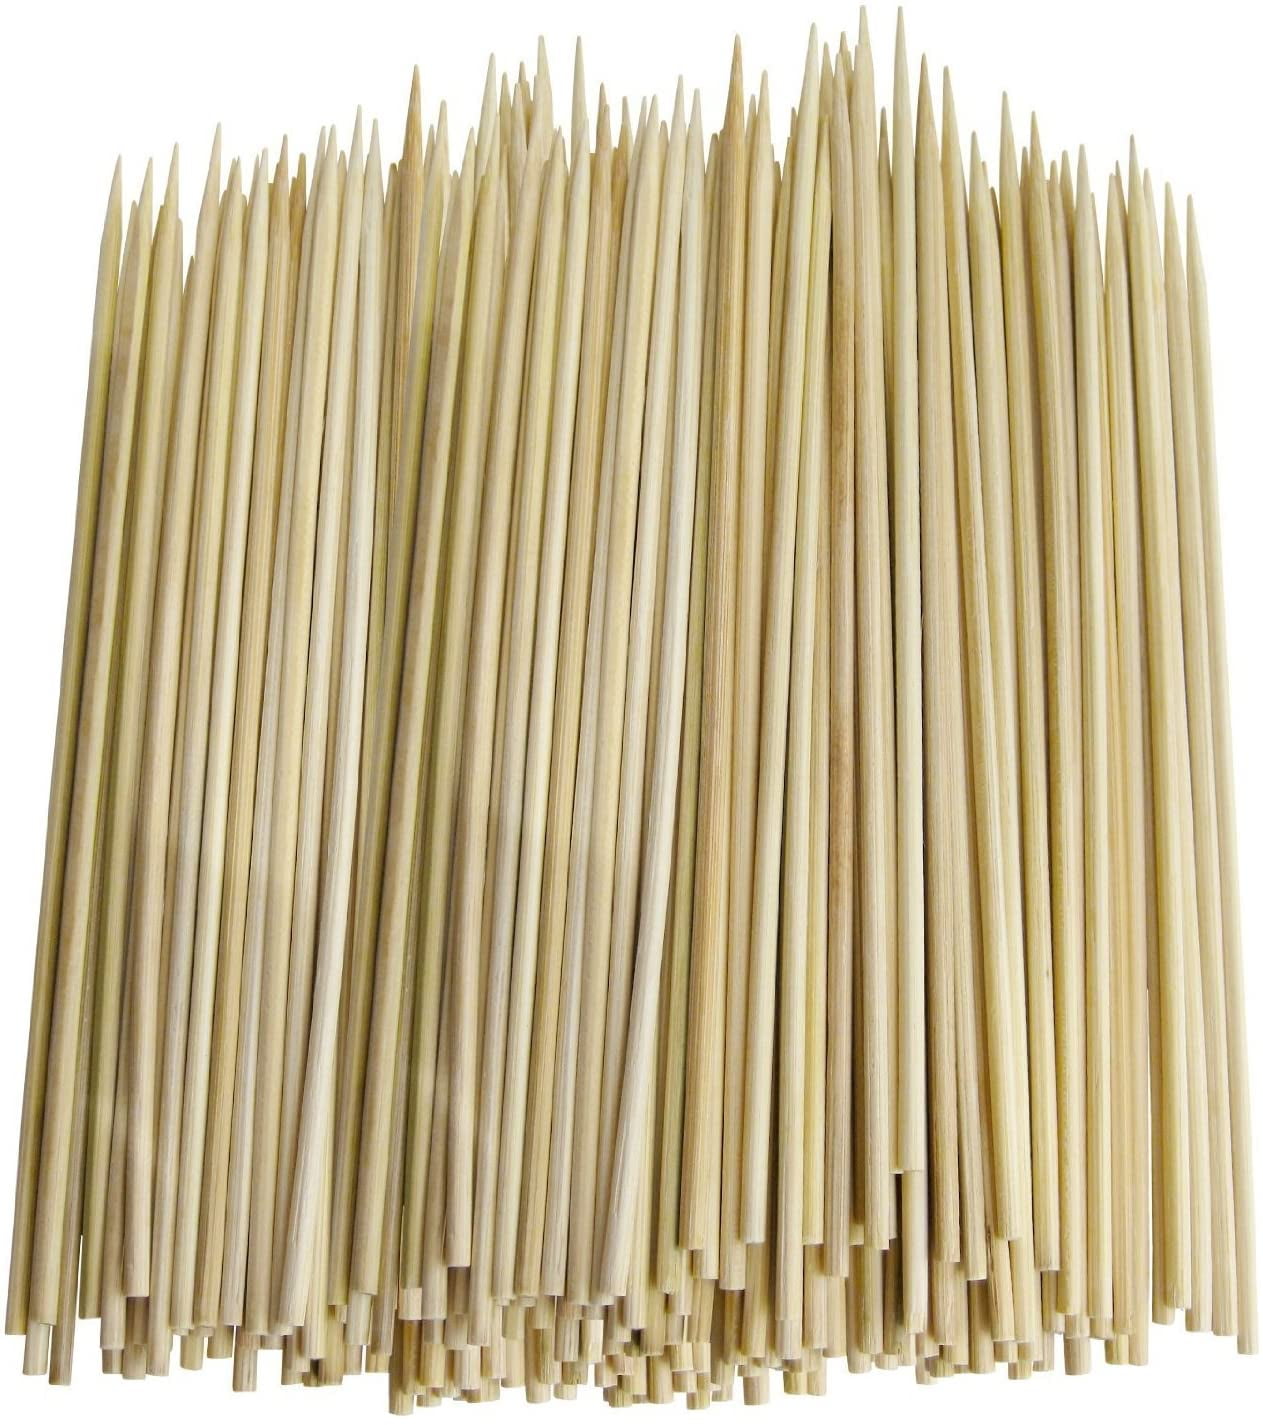 150 Bamboo Skewers BBQ Barbecues Kebab Fruit Wooden Sticks Party Picnic Camping 